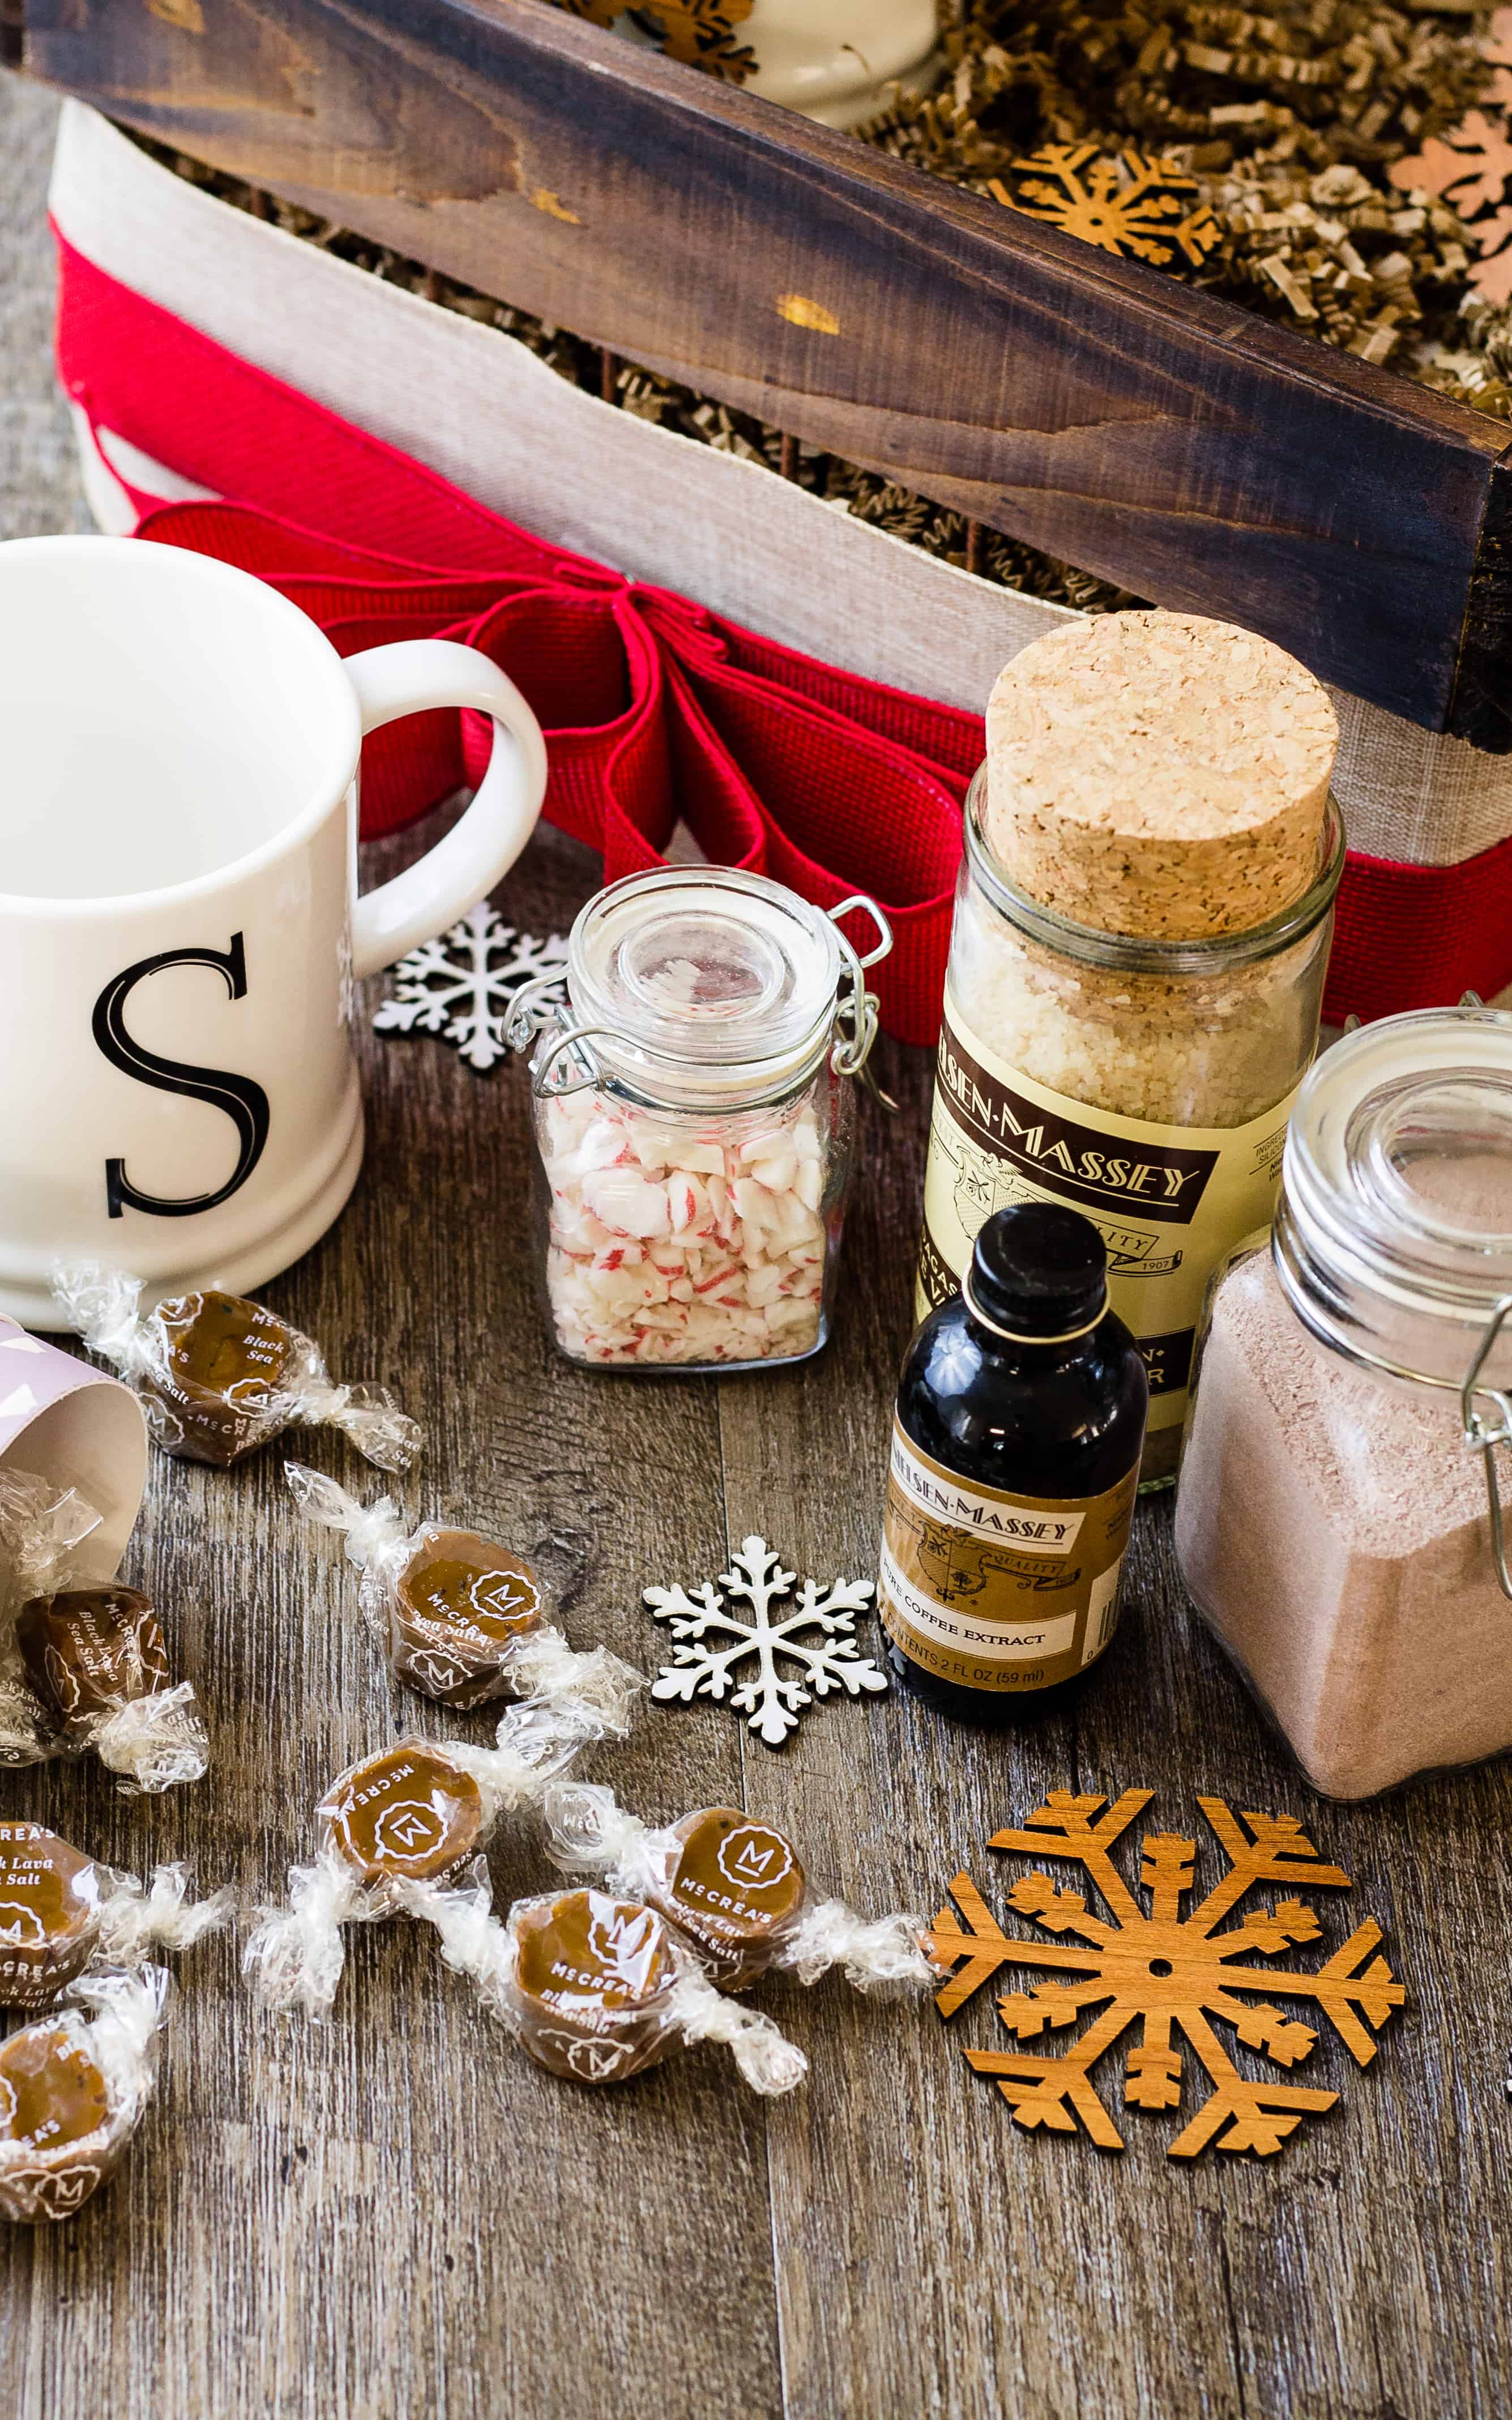 Mix up a Cocoa Mocha with a Gift Wrapping Get Away Gift Basket | Take Two Tapas | #GiftWrapping #Mocha #GetAway #GiftBasket #CocoaMocha #Holidays #AD